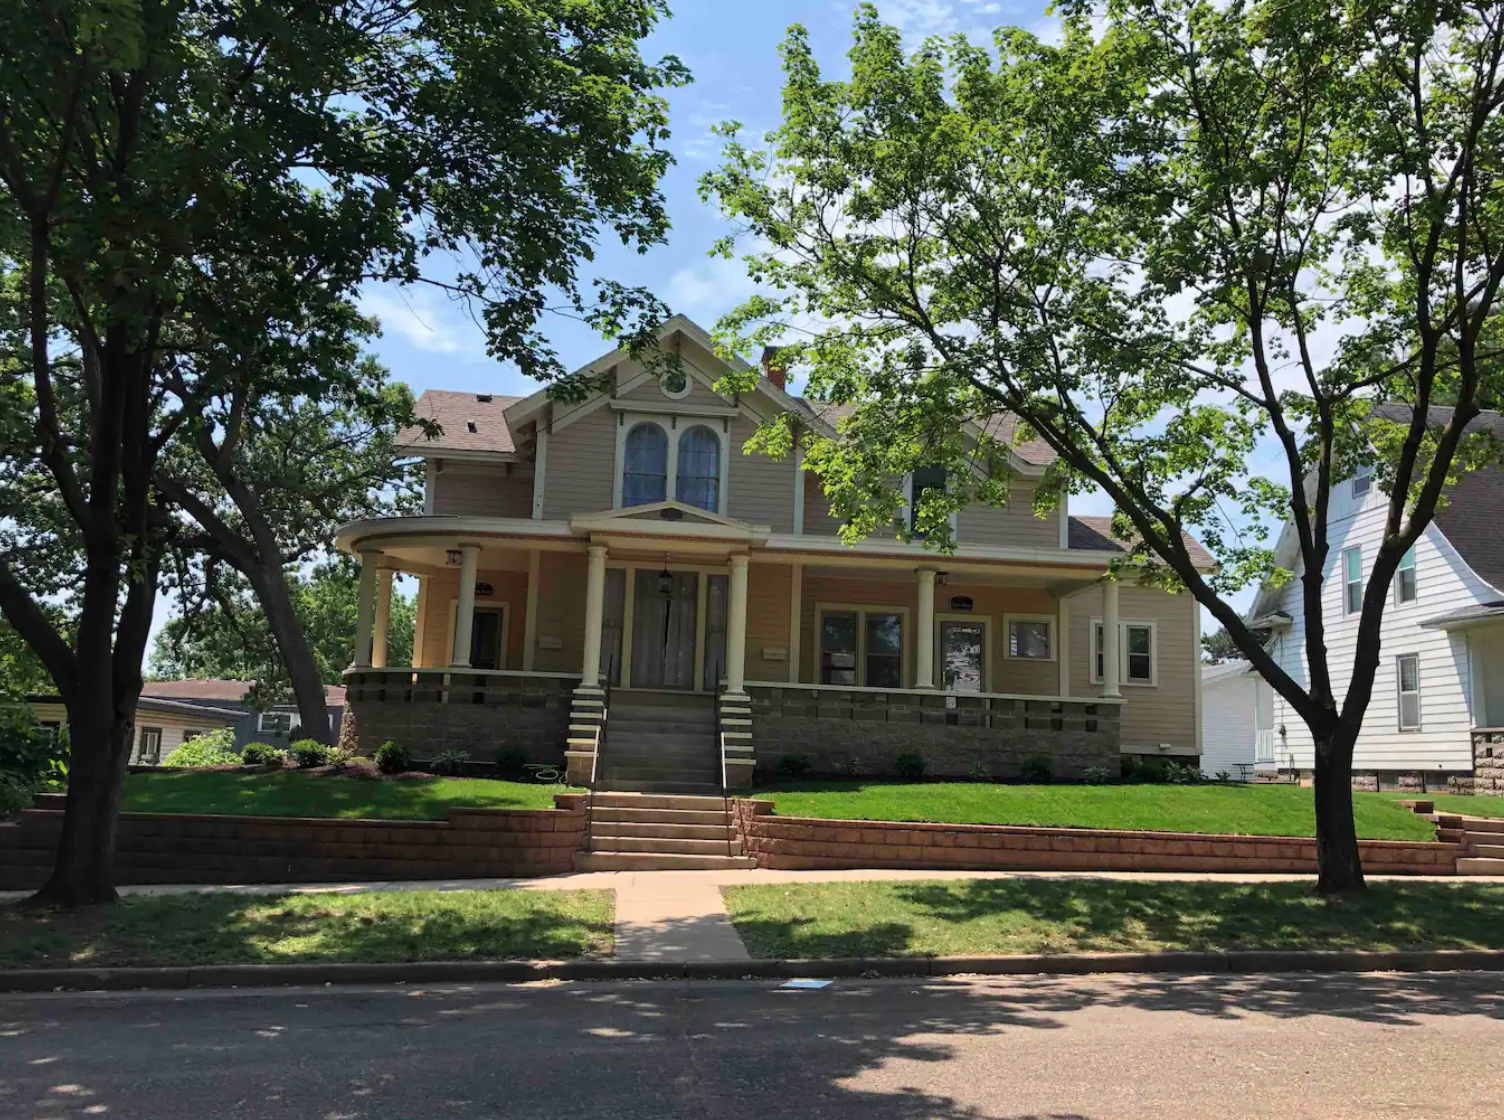 223 Hudson St., Eau Claire, Wisconsin 54703, 3 Bedrooms Bedrooms, ,2 BathroomsBathrooms,Multi-Family,Short-term-Vacation,223 Hudson St.,1150